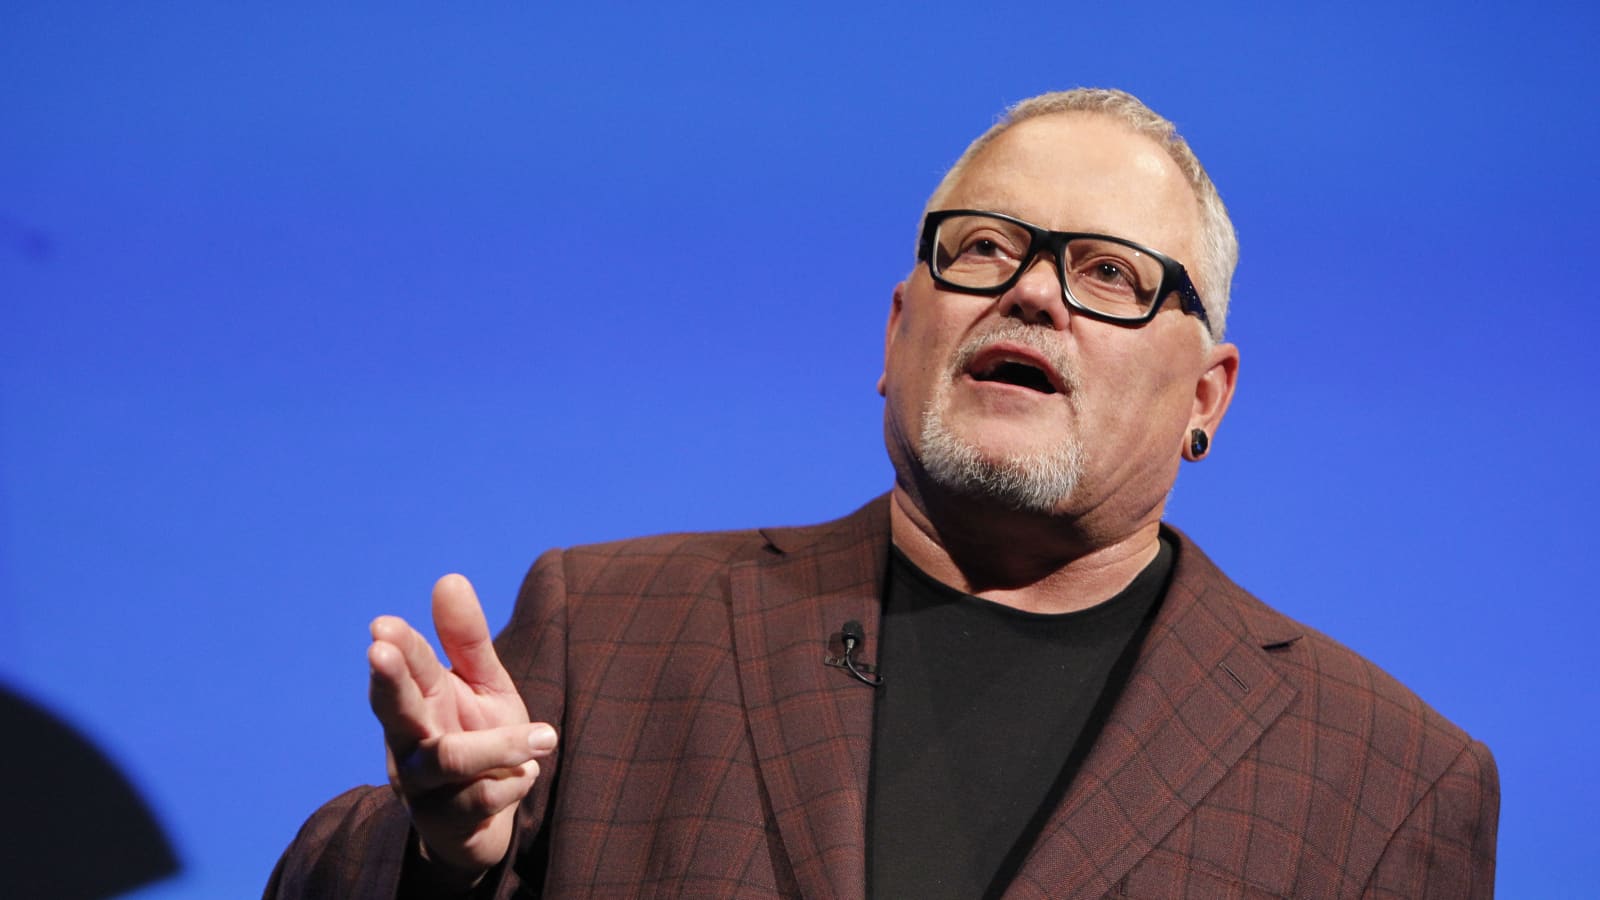 GoDaddy founder Bob Parsons says 'American Dream is alive and well'